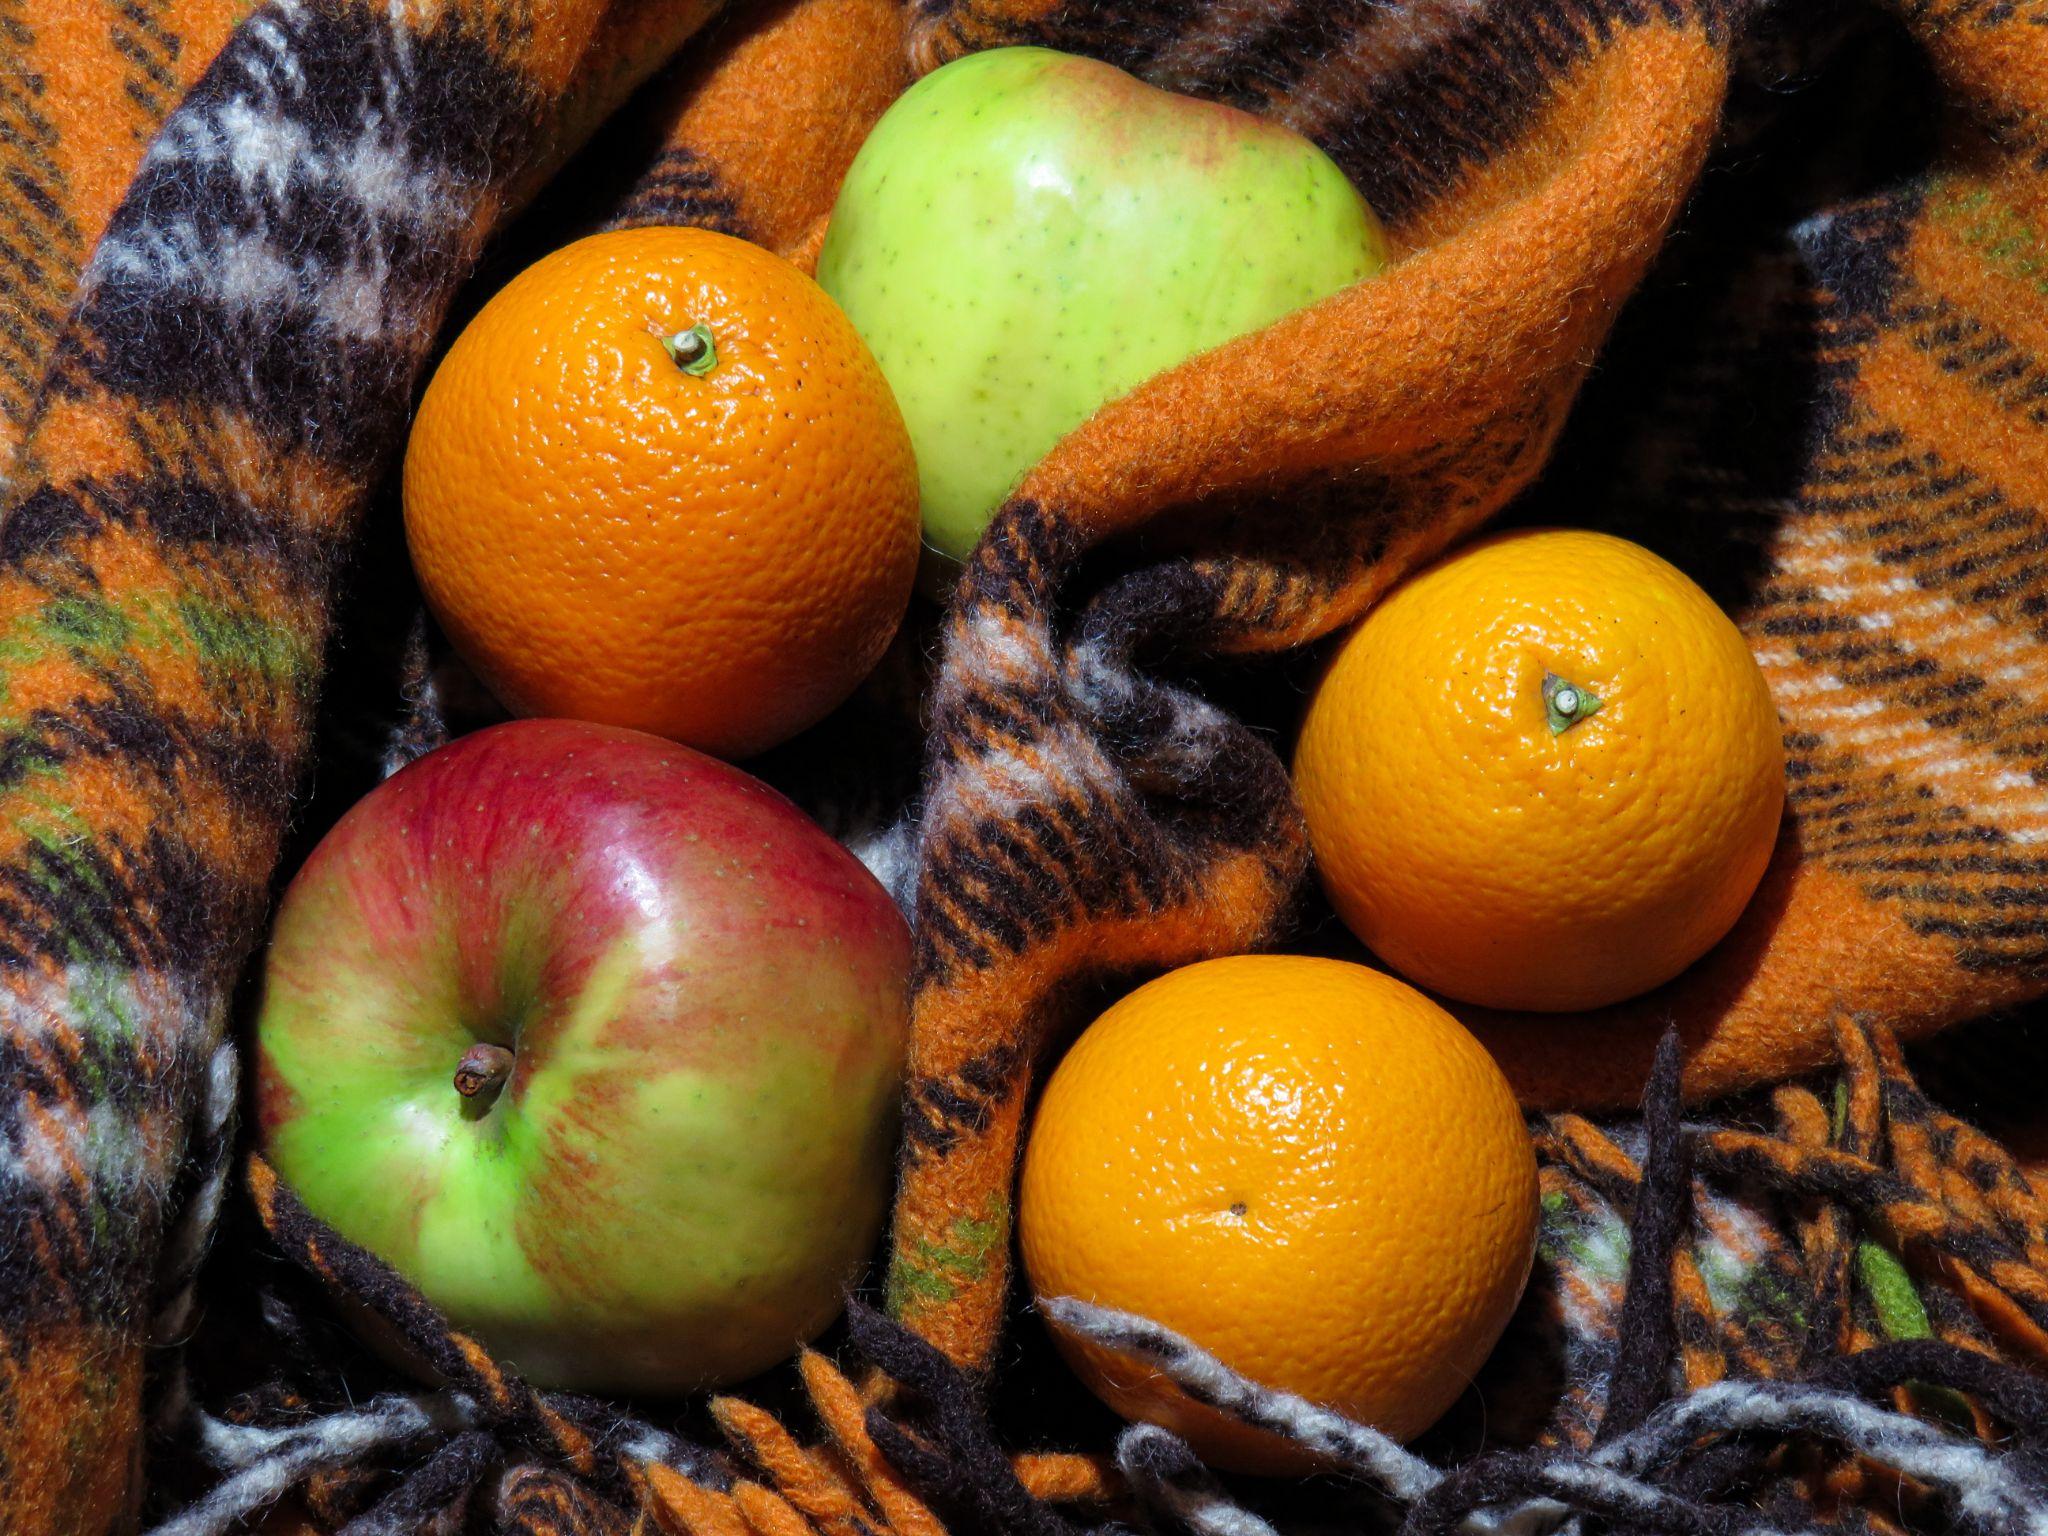 Photograph of apples and oranges on top of a plaid fabric.